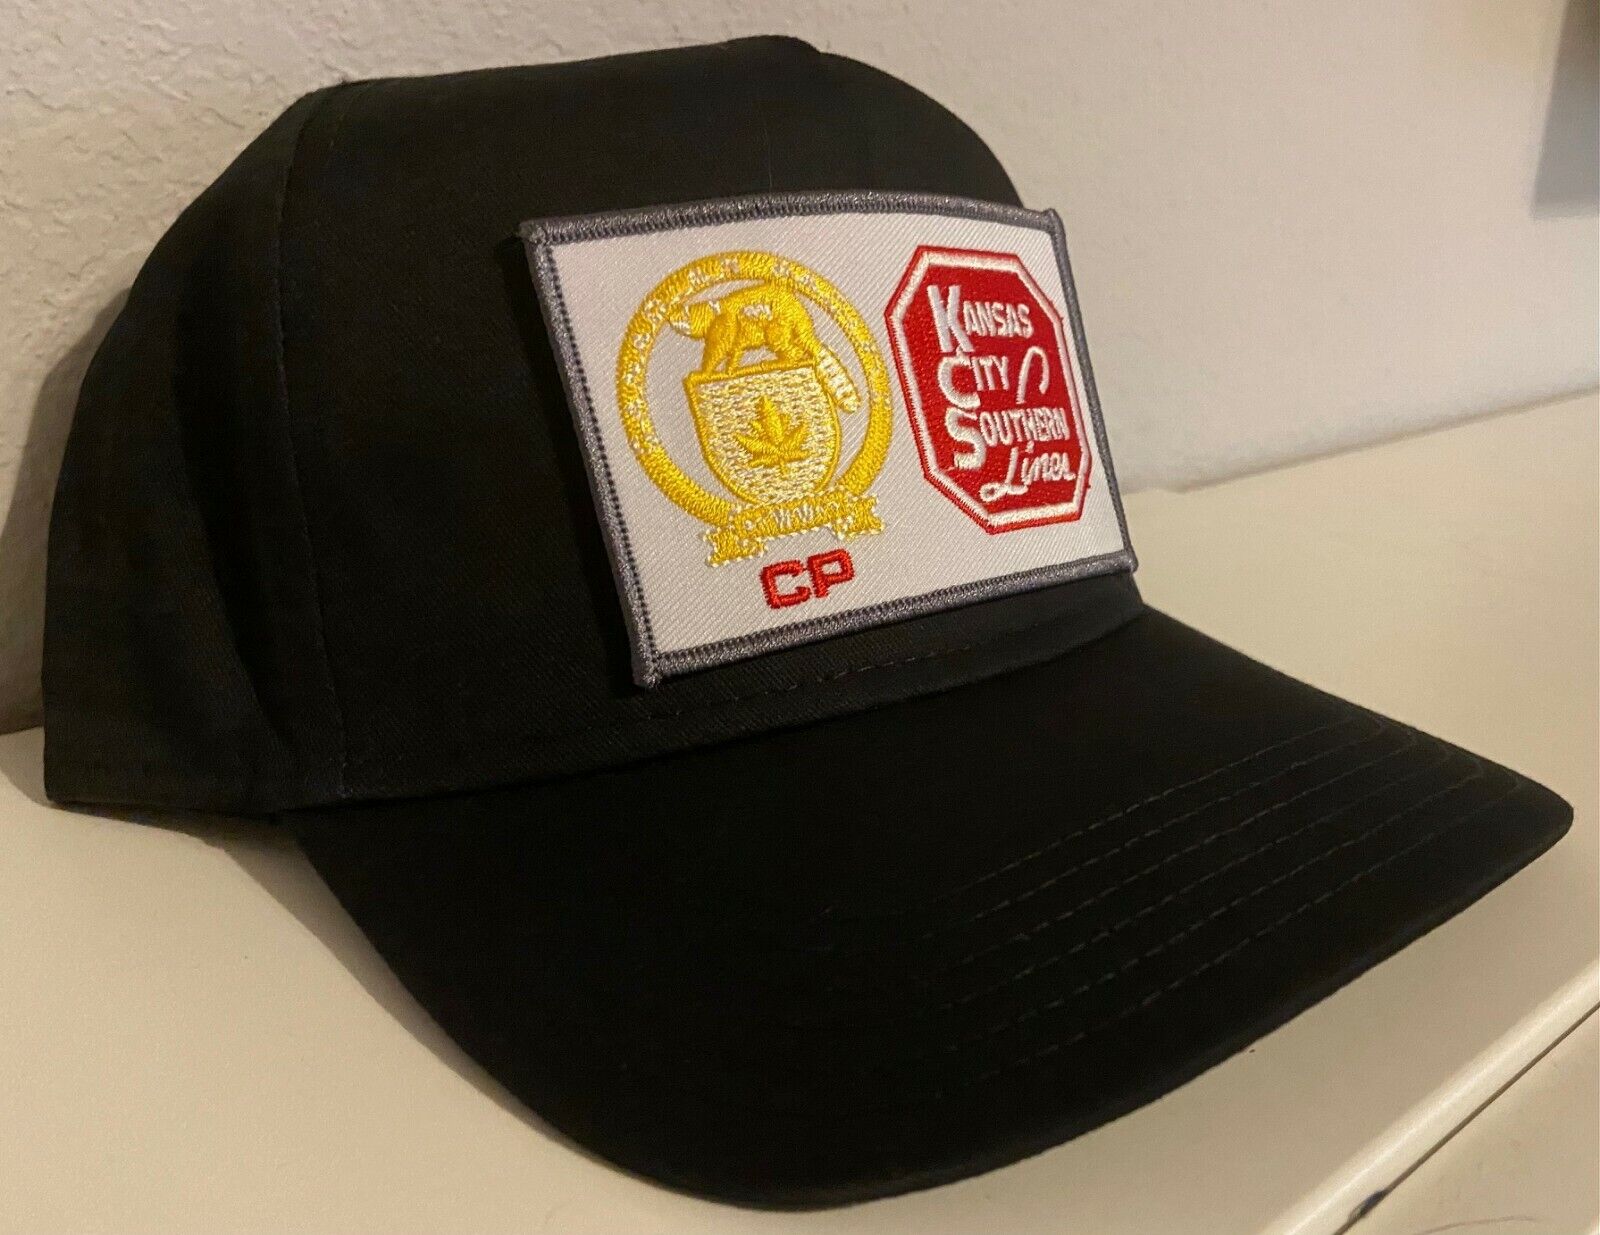 Cap / Hat - Canadian Pacific, Kansas City Southern Merger #22386- NEW